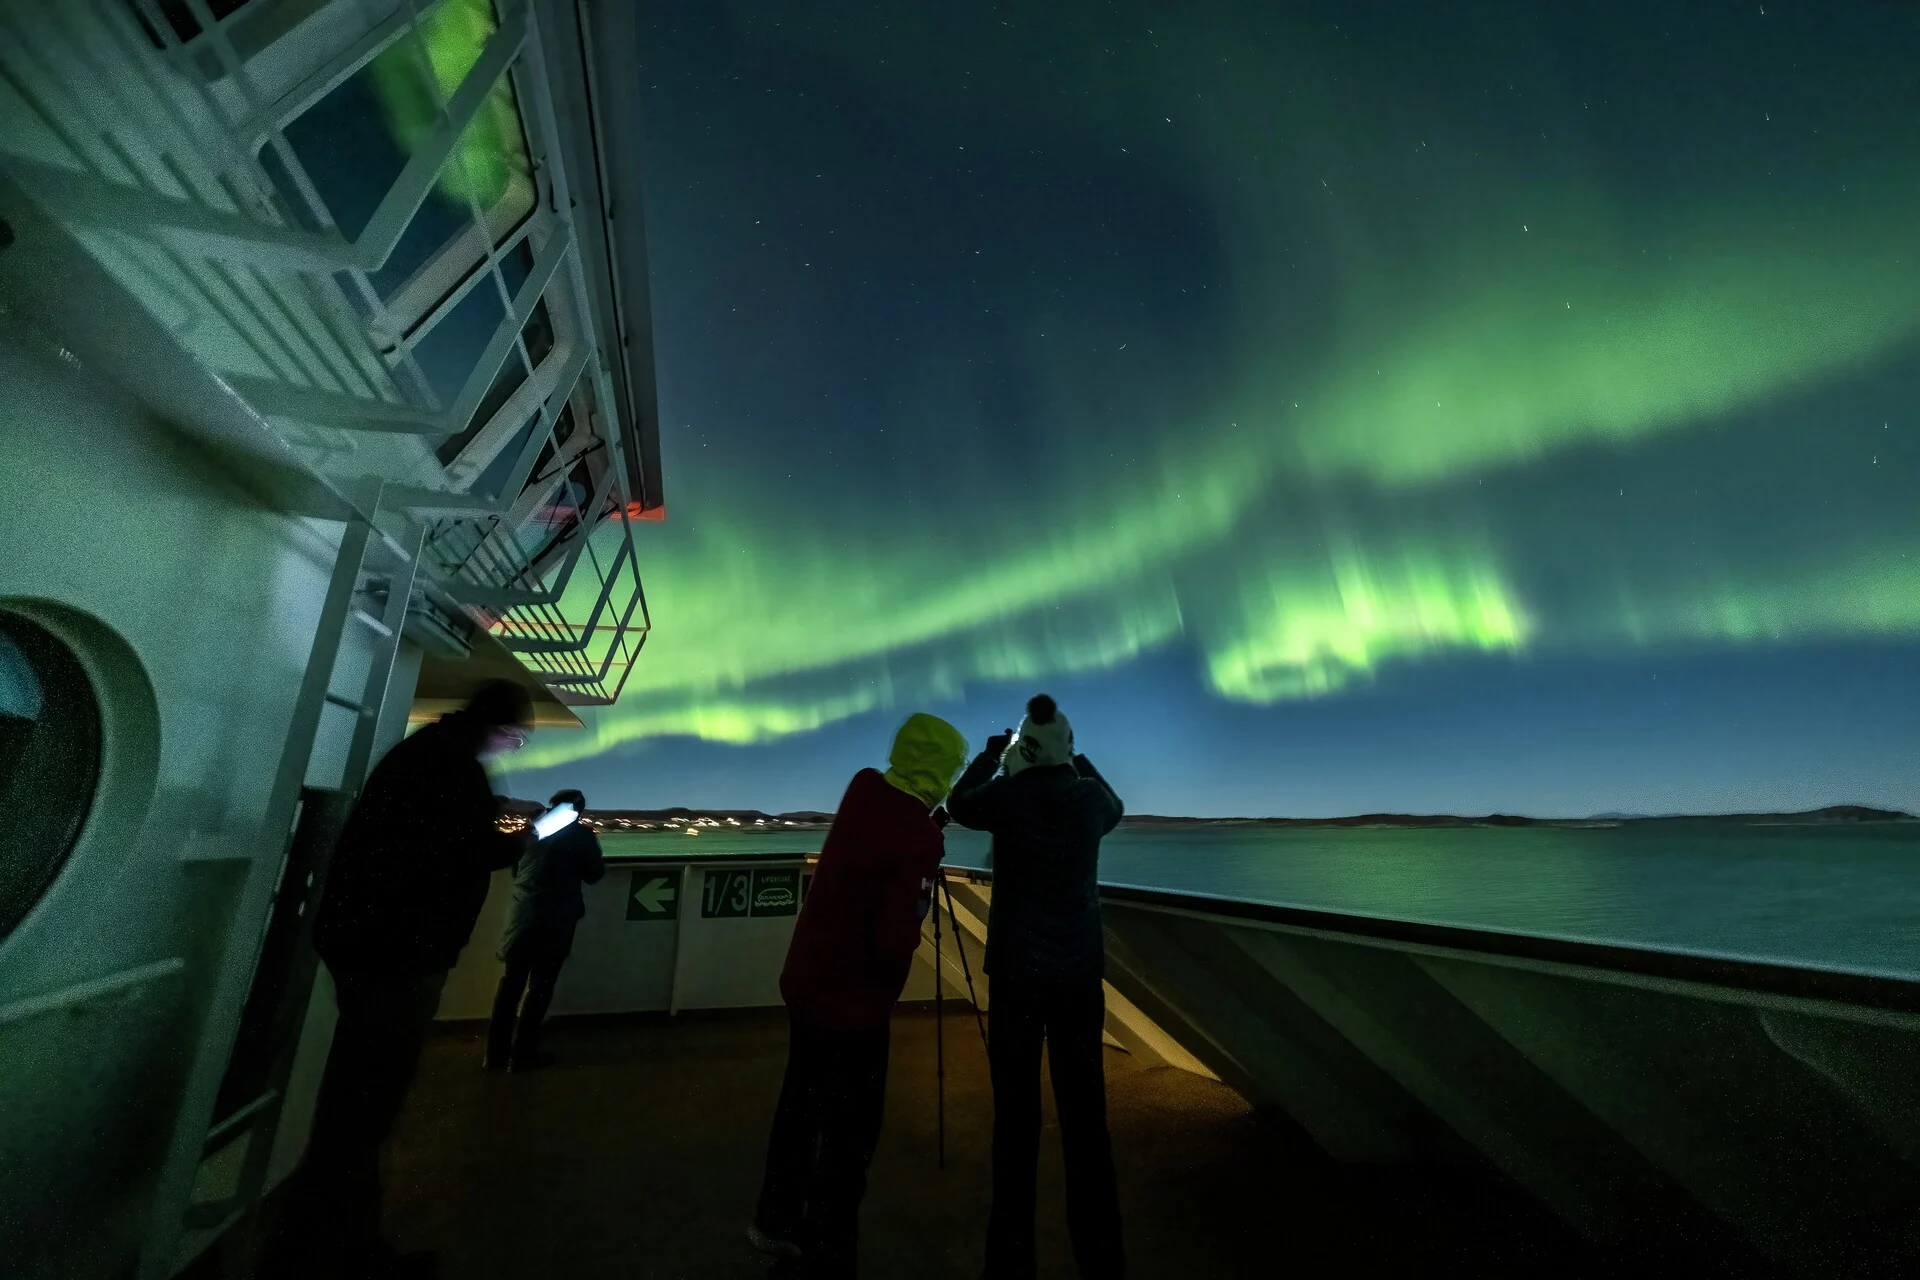 Photographing the Northern Lights with a smartphone on board a Hurtigruten ship